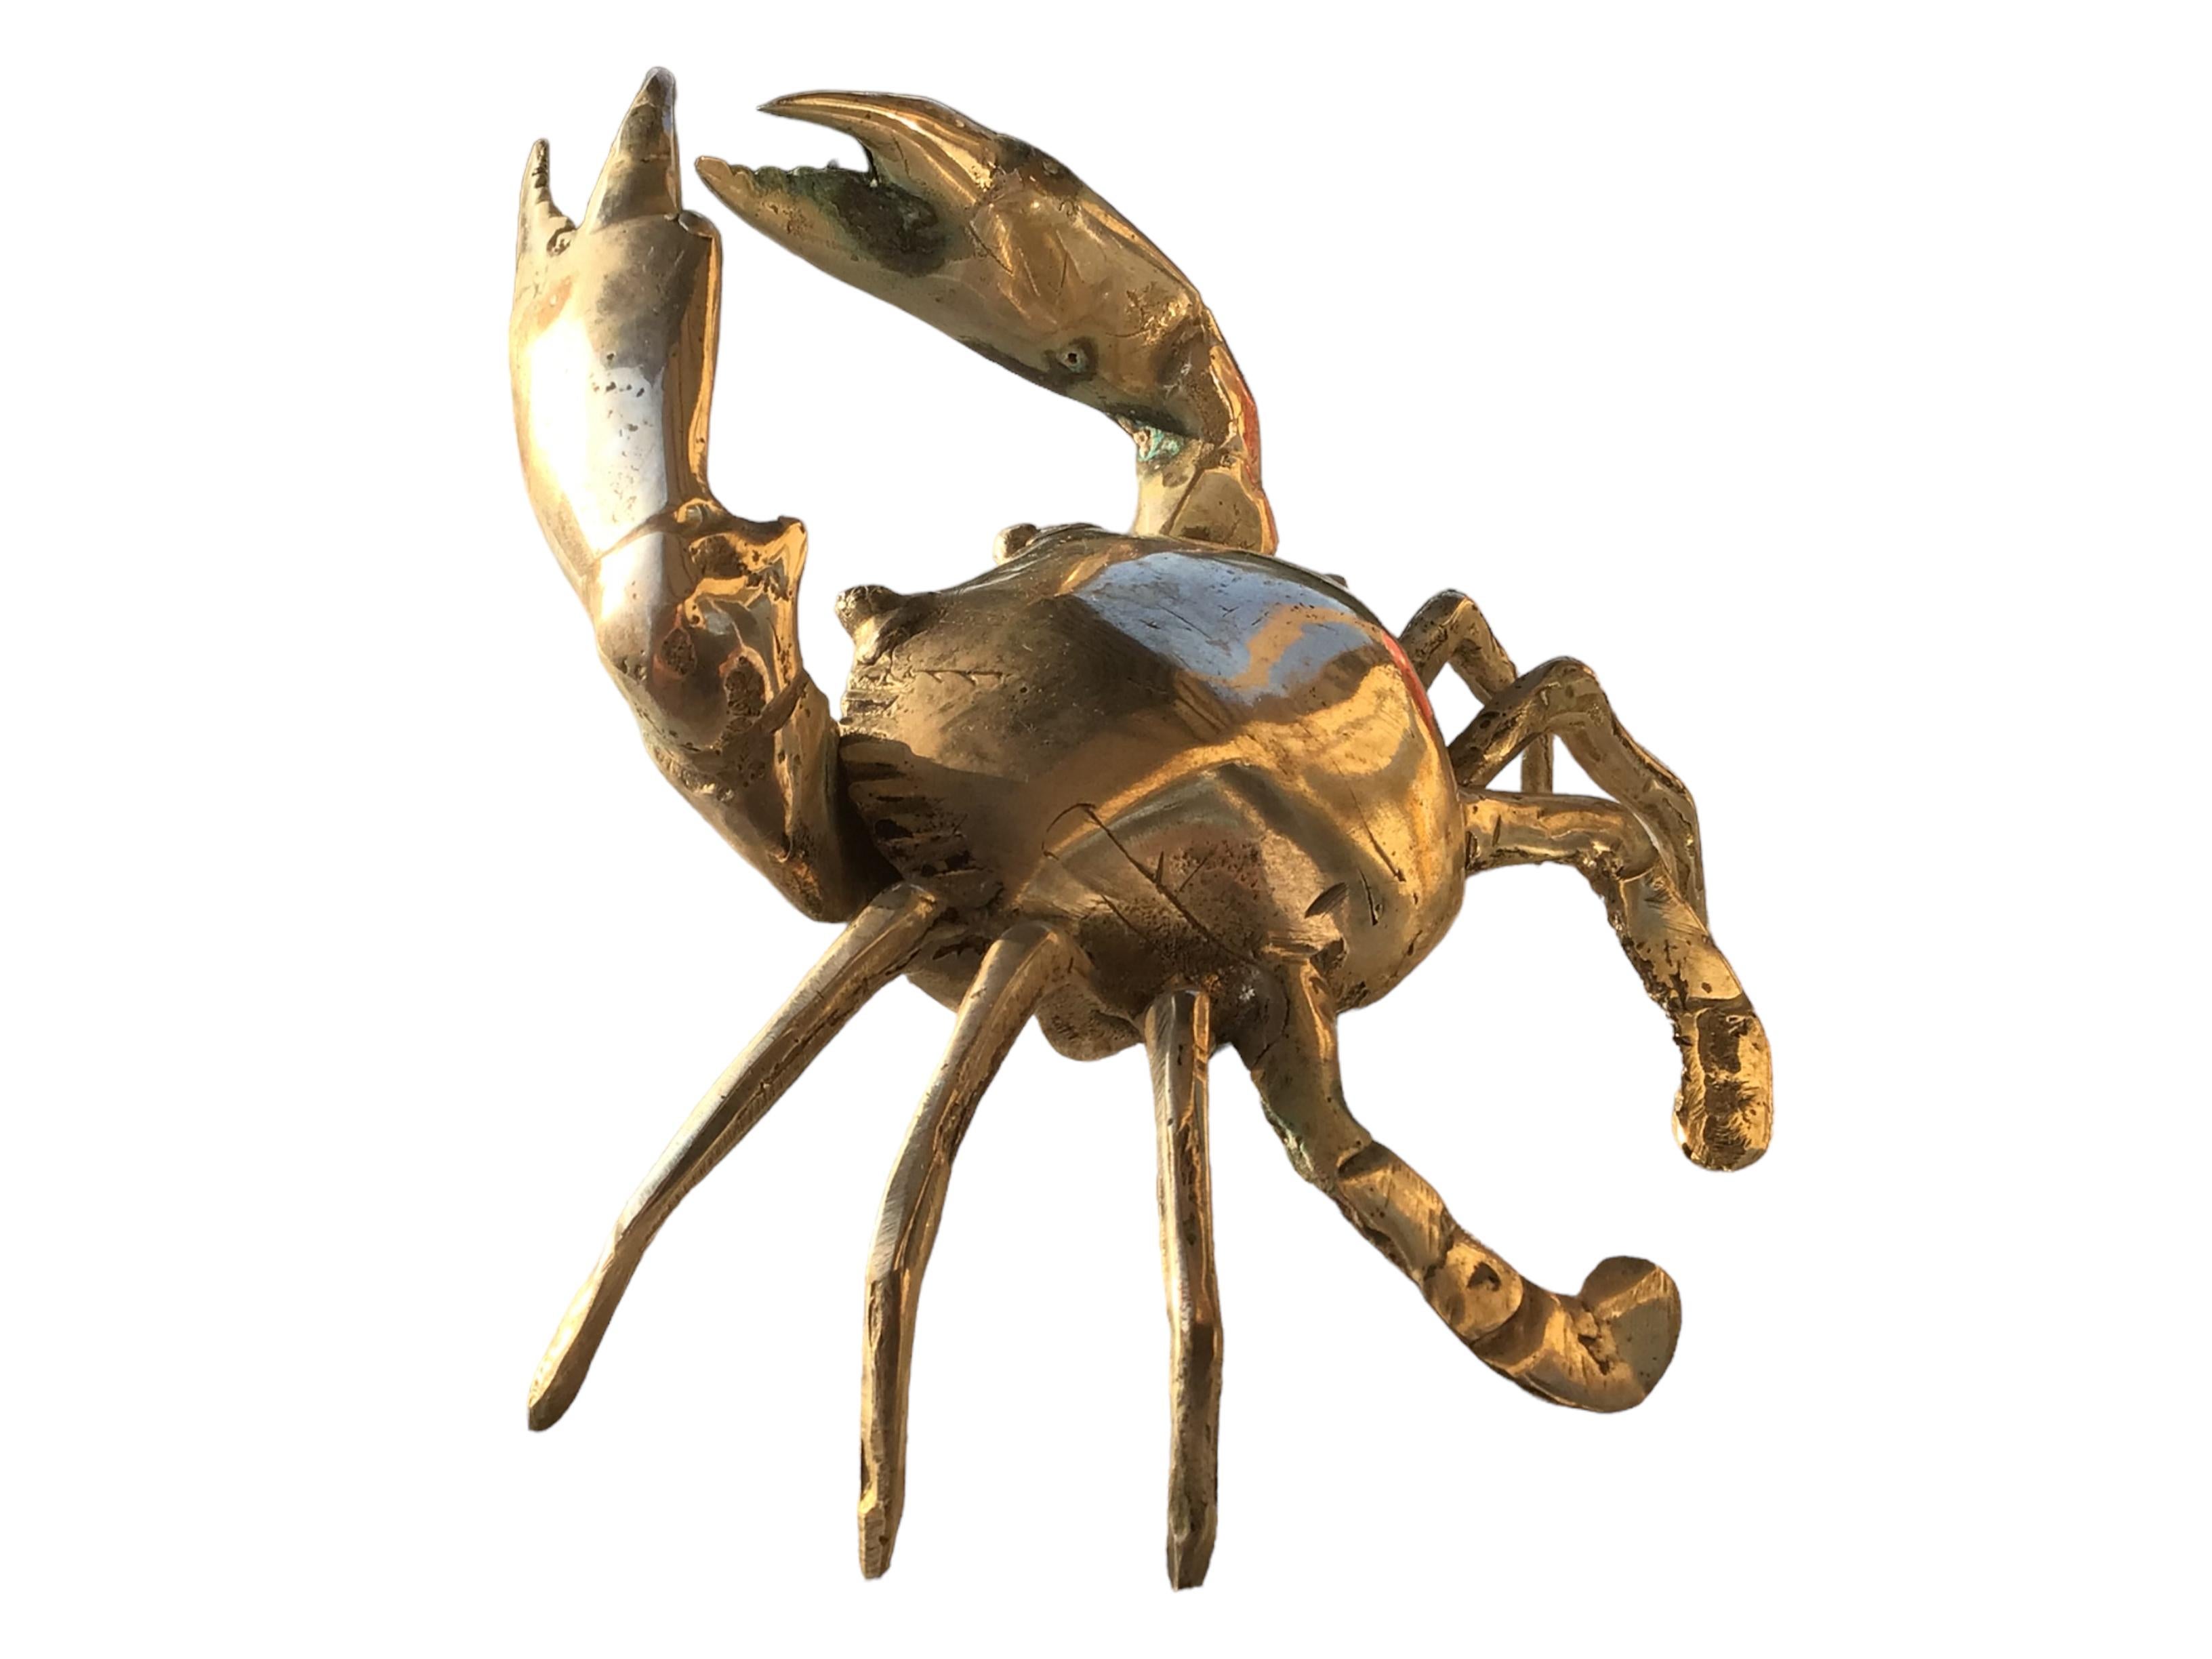 Hand-Crafted Beautiful Crab Sculpture Figure Statue Nickeled Metal, Vintage, Italy, 1980s